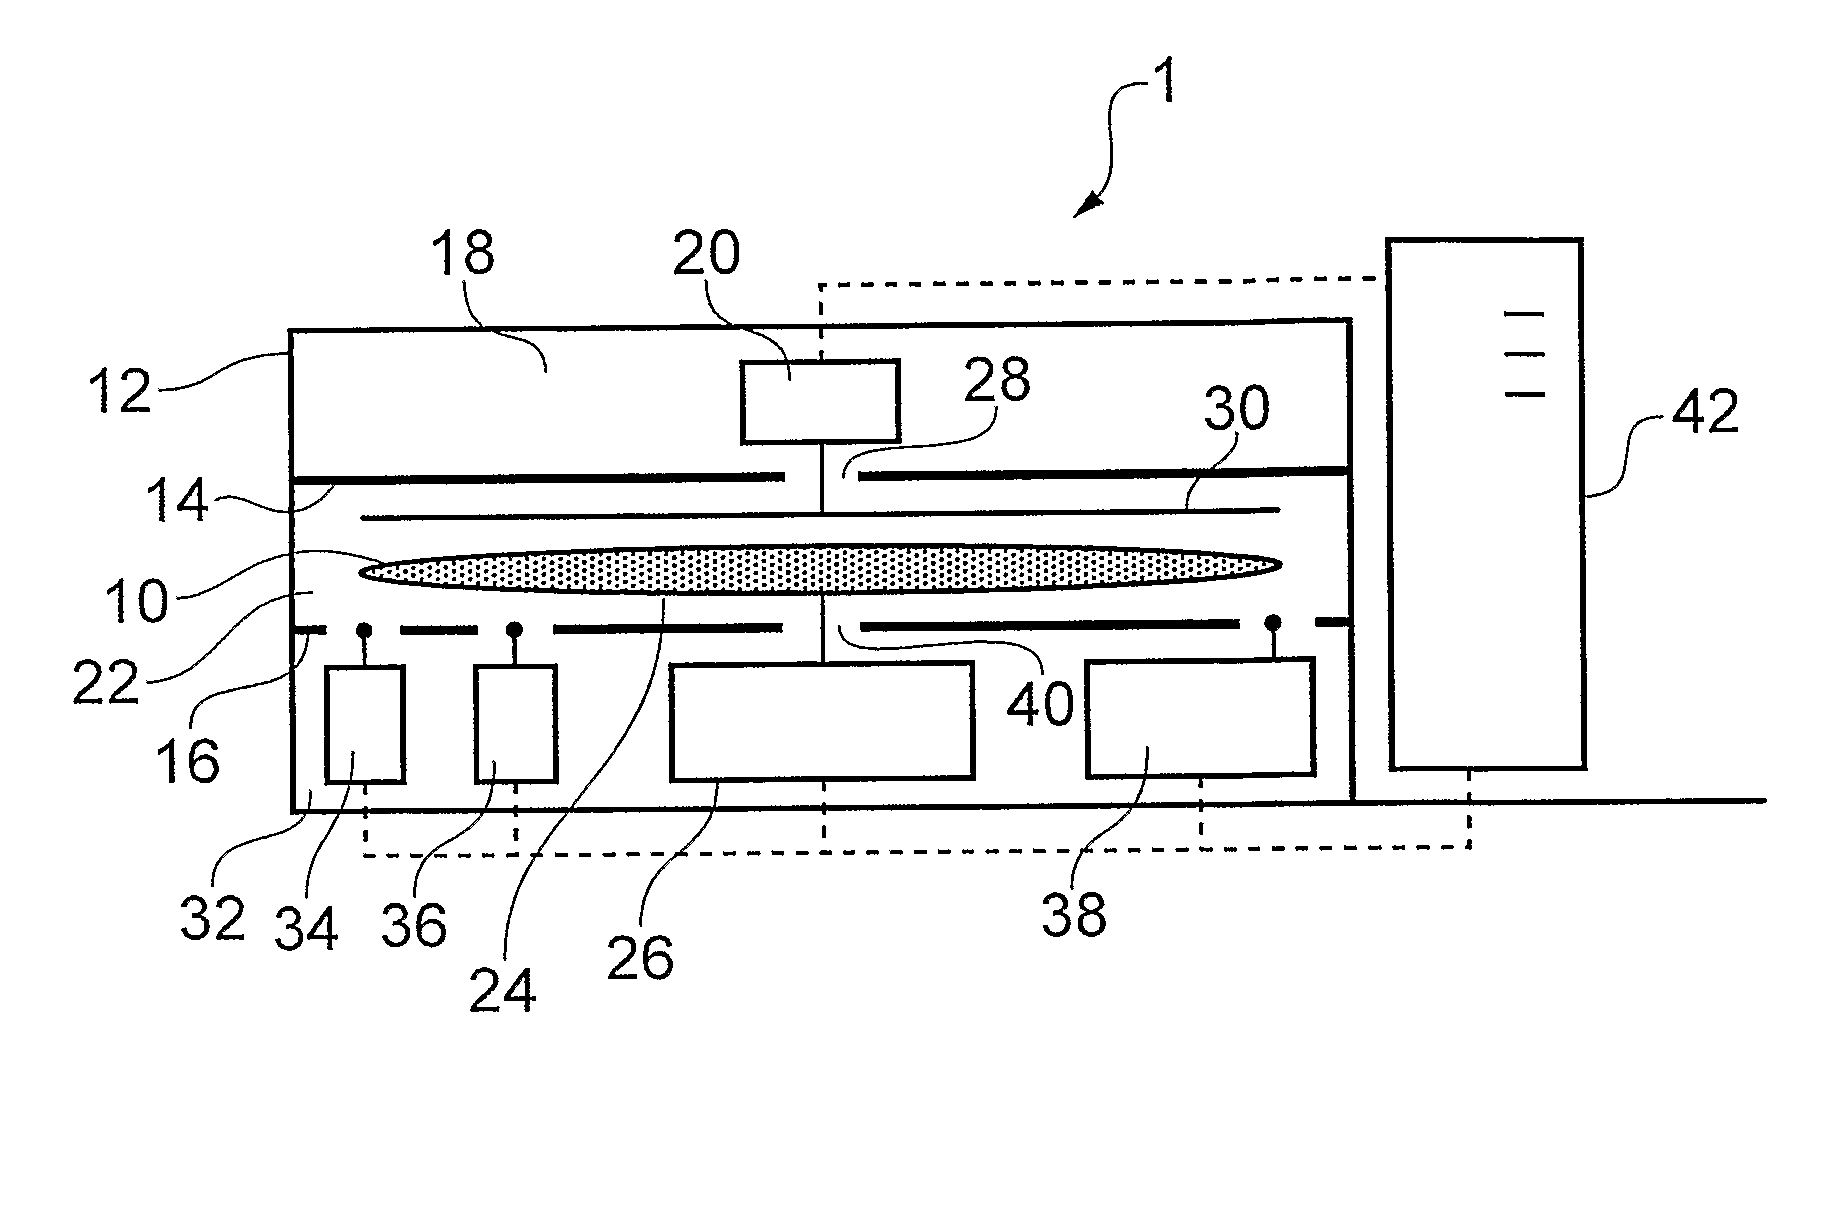 Semiconductor wafer metrology apparatus and method